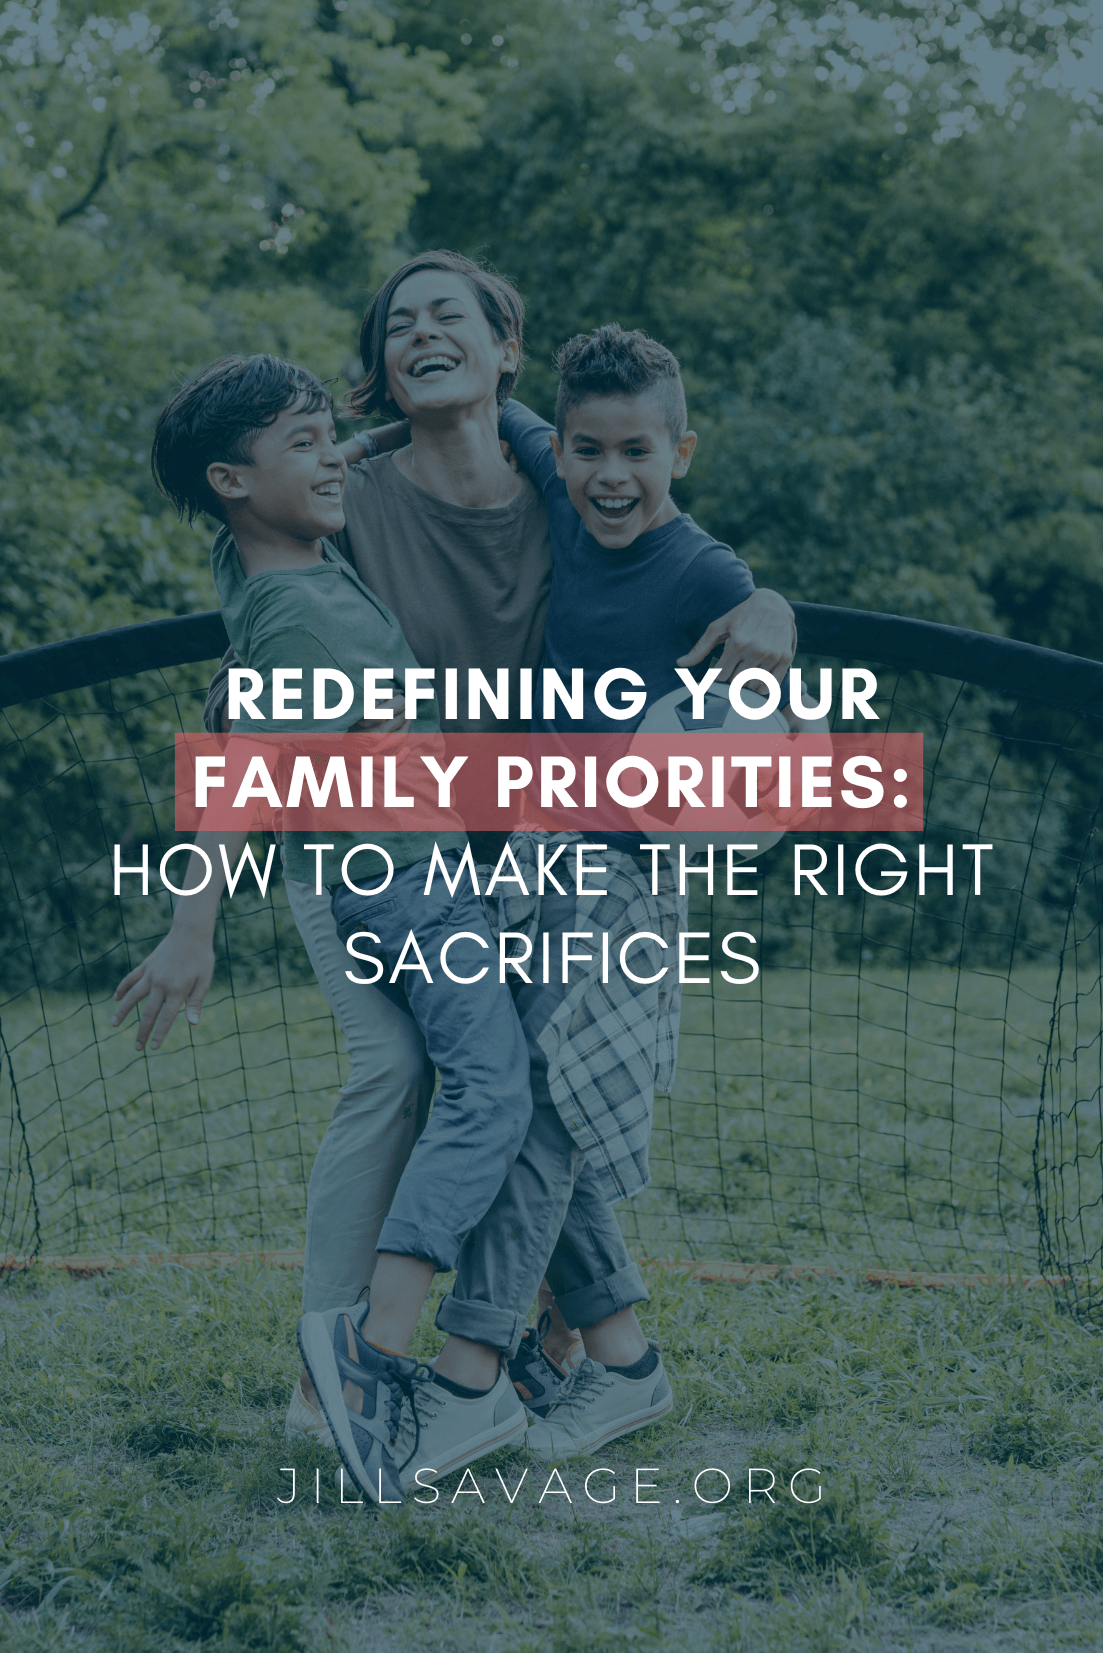 Redefining Your Family Priorities: How to Make the Right Sacrifices